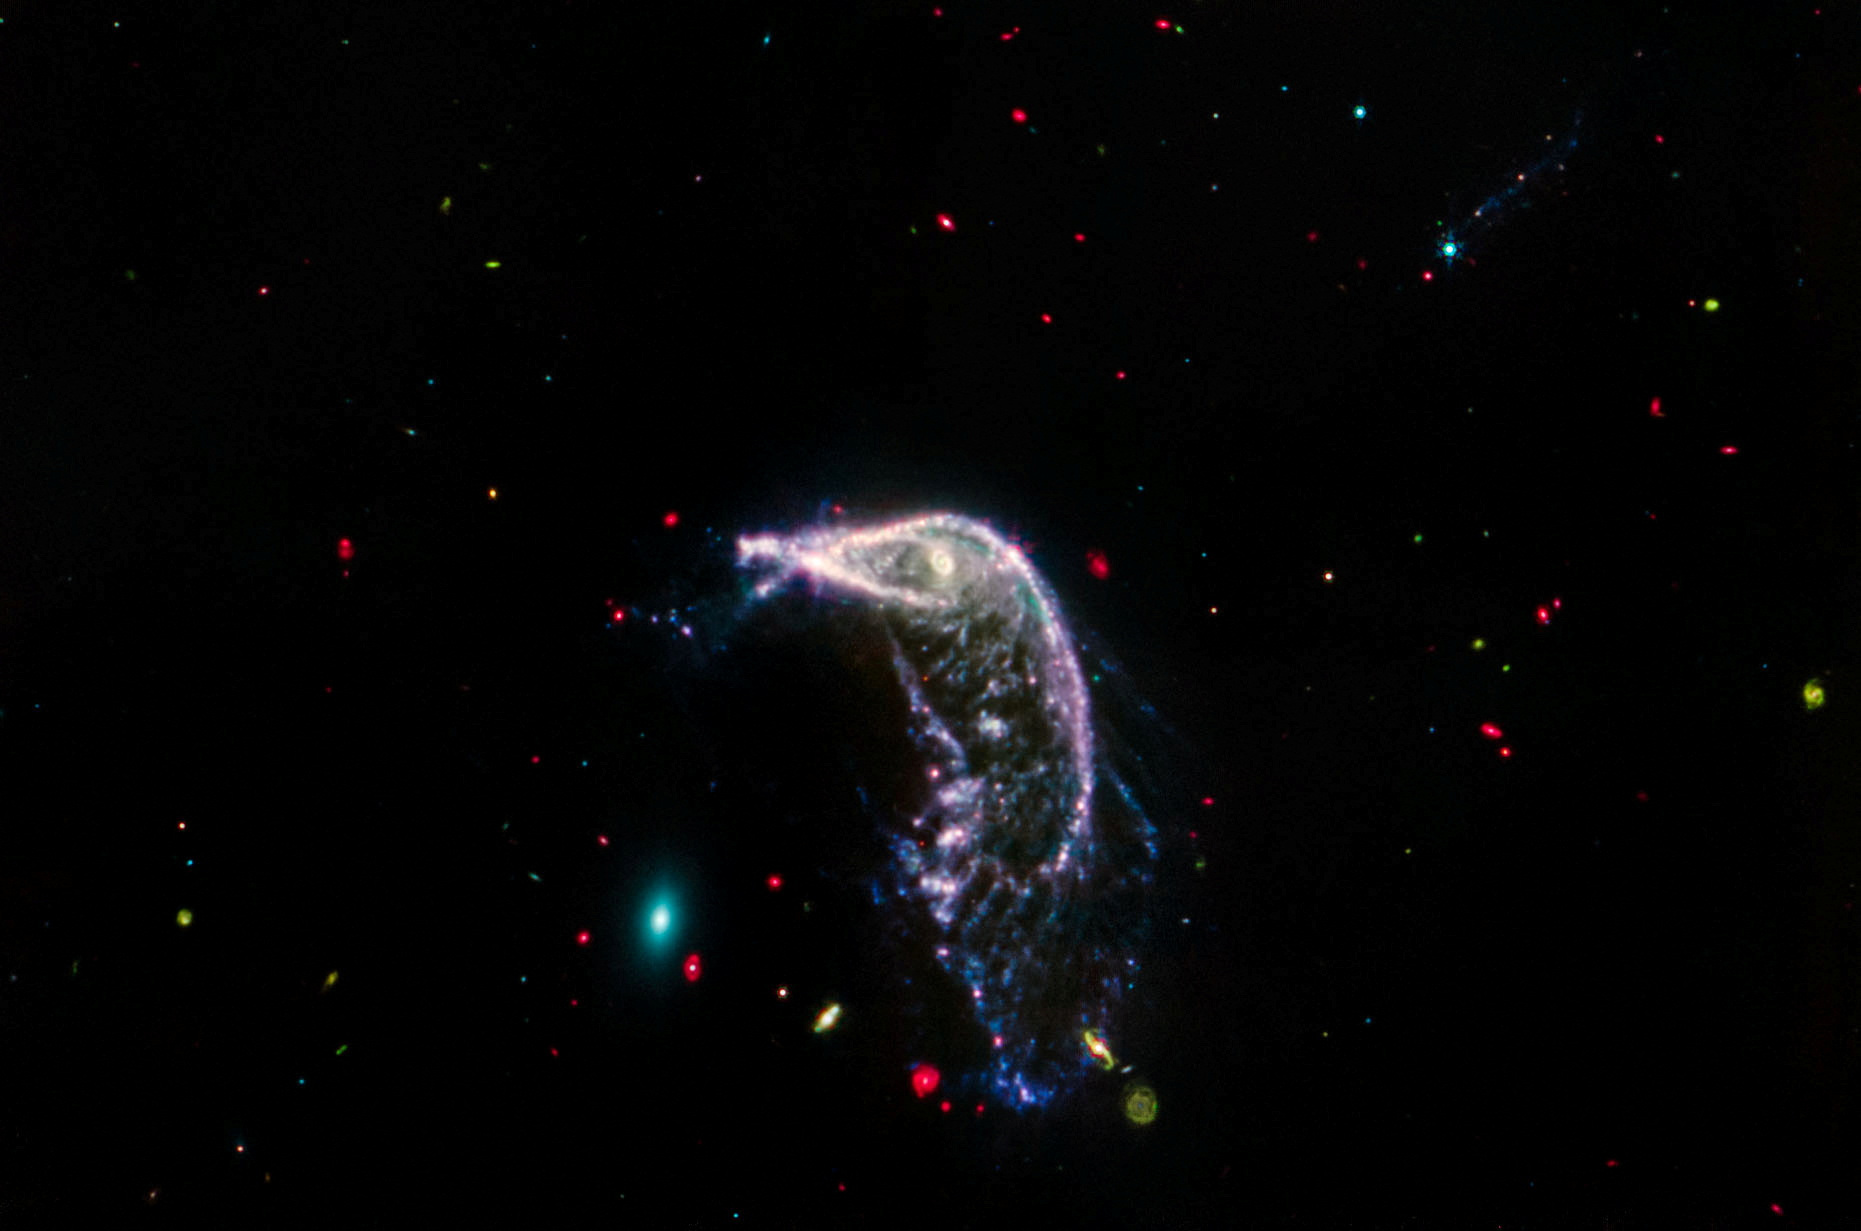 Arp 142, two interacting galaxies, are shown in an image obtained by the James Webb Space Telescope